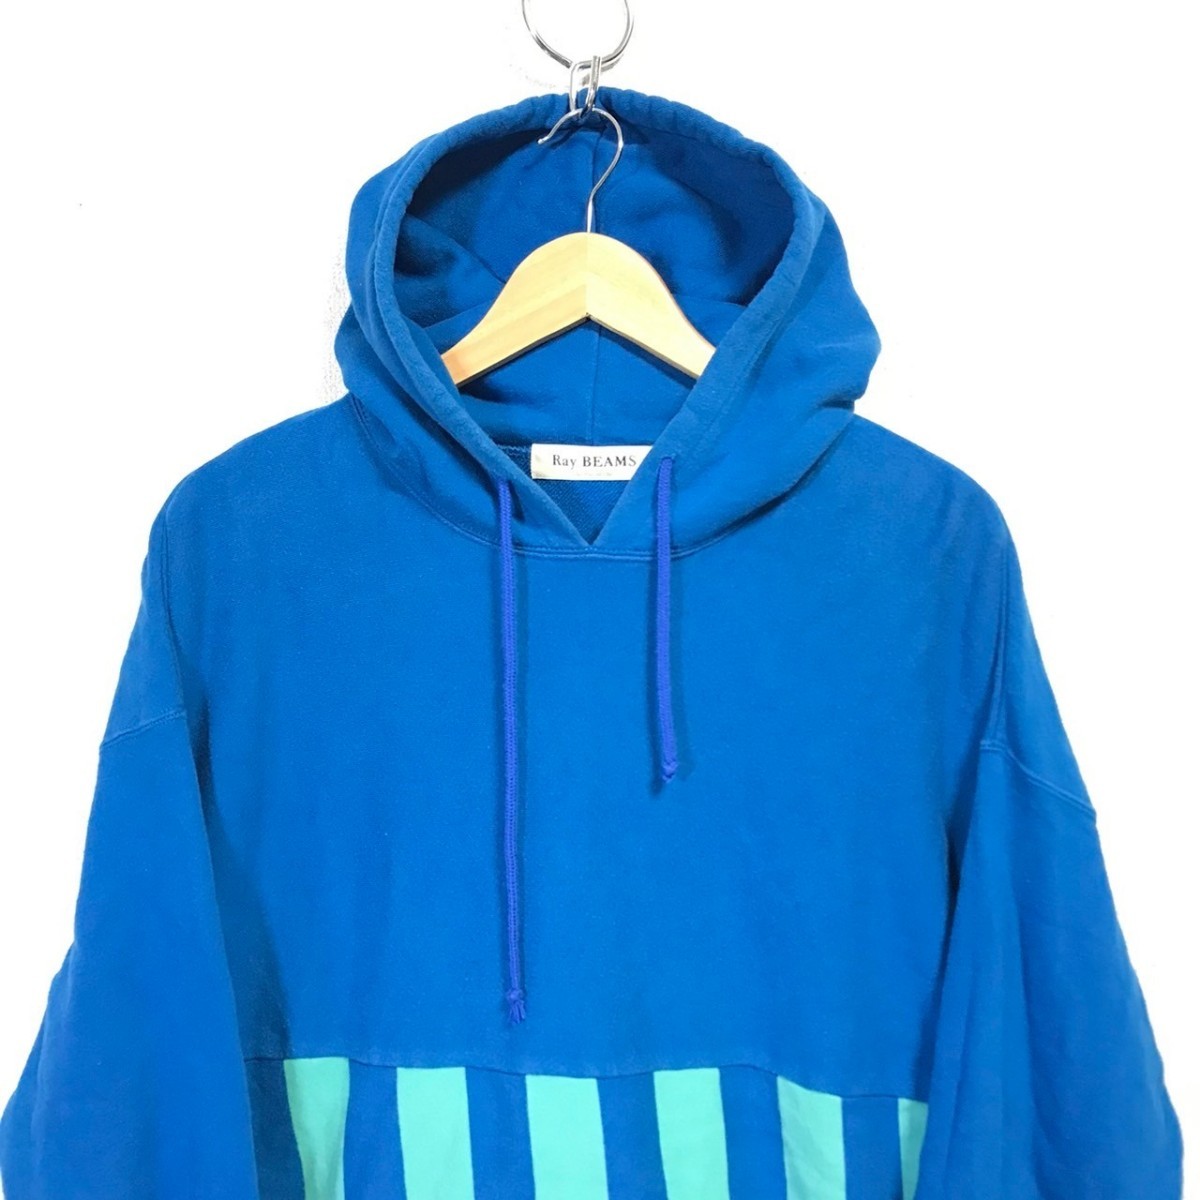 H5960dL Ray BEAMS Ray Beams size L rank sweat Parker pull over fender -do Parker blue stripe pattern lady's cotton 